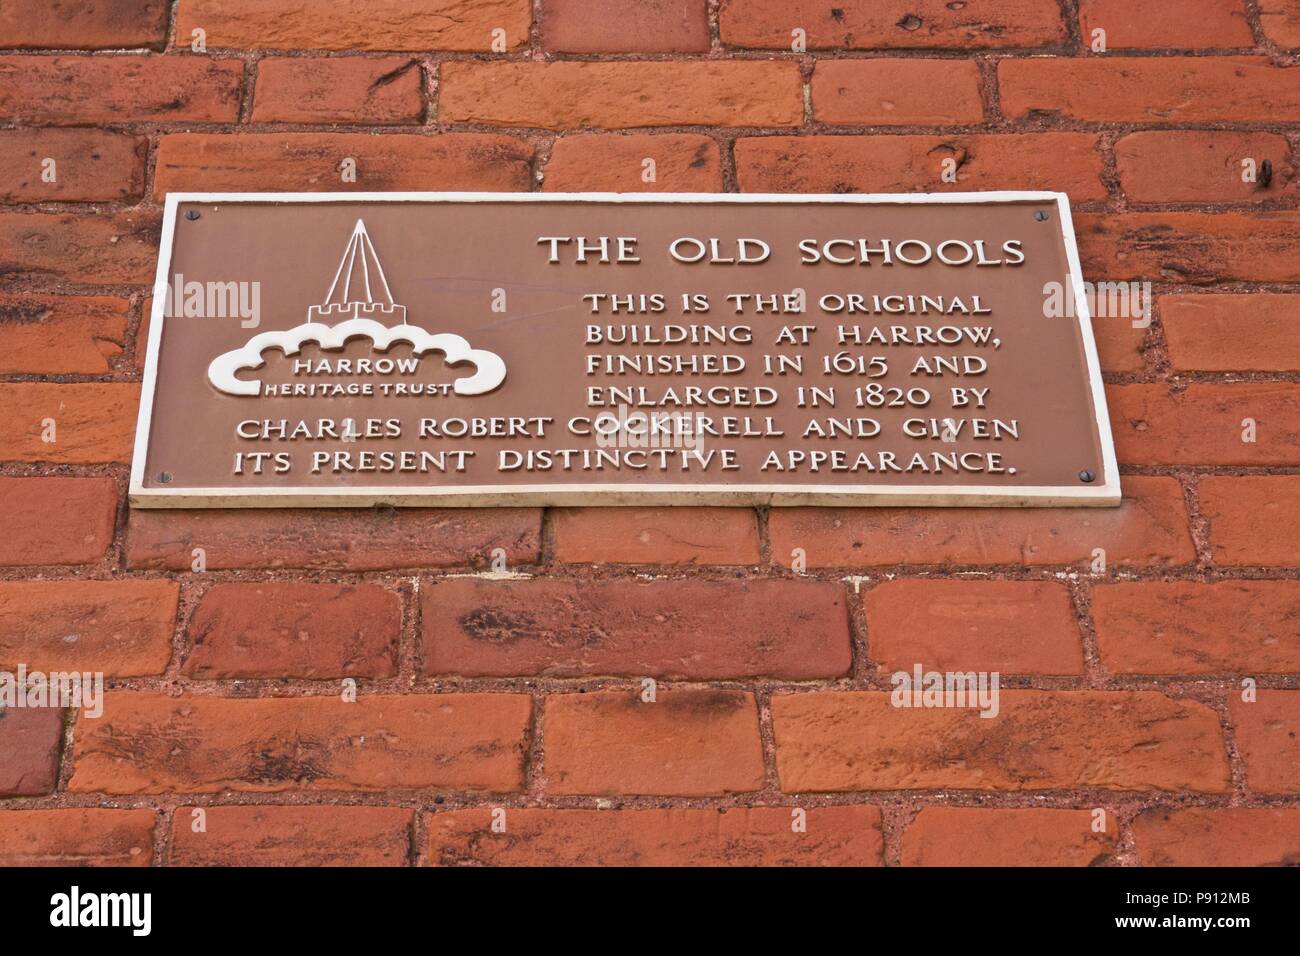 A plaque by Harrow Heritage Trust for The Old Schools. This is the original building at Harrow, finished in 1615 for Harrow School. Stock Photo